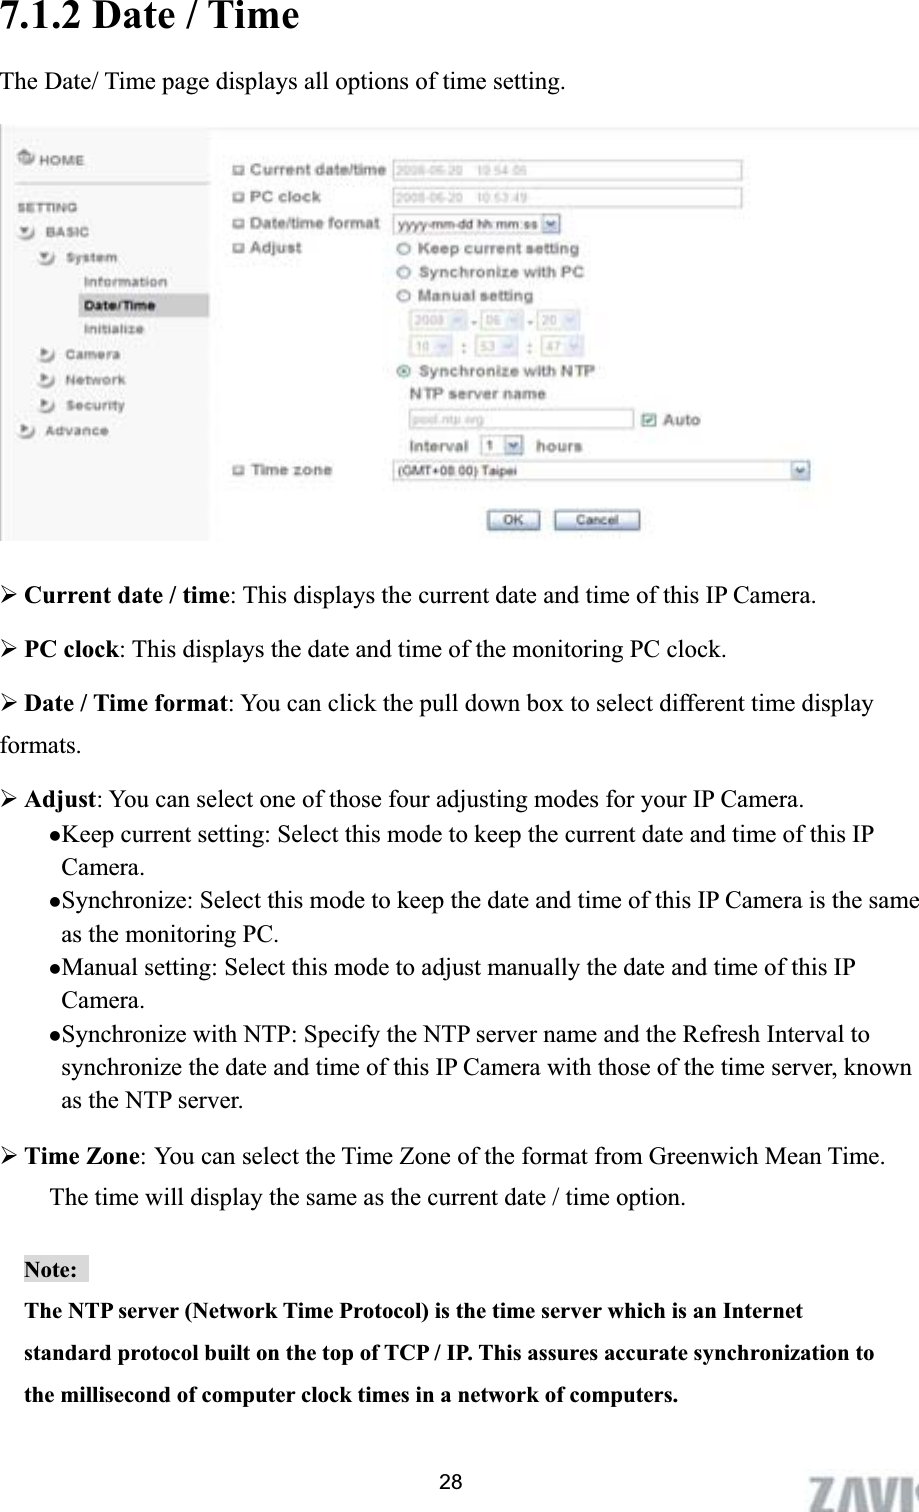      7.1.2 Date / Time The Date/ Time page displays all options of time setting. ¾Current date / time: This displays the current date and time of this IP Camera. ¾PC clock: This displays the date and time of the monitoring PC clock.   ¾Date / Time format: You can click the pull down box to select different time display formats.  ¾Adjust: You can select one of those four adjusting modes for your IP Camera.   zKeep current setting: Select this mode to keep the current date and time of this IP Camera. zSynchronize: Select this mode to keep the date and time of this IP Camera is the same as the monitoring PC. zManual setting: Select this mode to adjust manually the date and time of this IP Camera.  zSynchronize with NTP: Specify the NTP server name and the Refresh Interval to synchronize the date and time of this IP Camera with those of the time server, known as the NTP server. ¾Time Zone: You can select the Time Zone of the format from Greenwich Mean Time. The time will display the same as the current date / time option.     Note:The NTP server (Network Time Protocol) is the time server which is an Internet standard protocol built on the top of TCP / IP. This assures accurate synchronization to the millisecond of computer clock times in a network of computers. 28